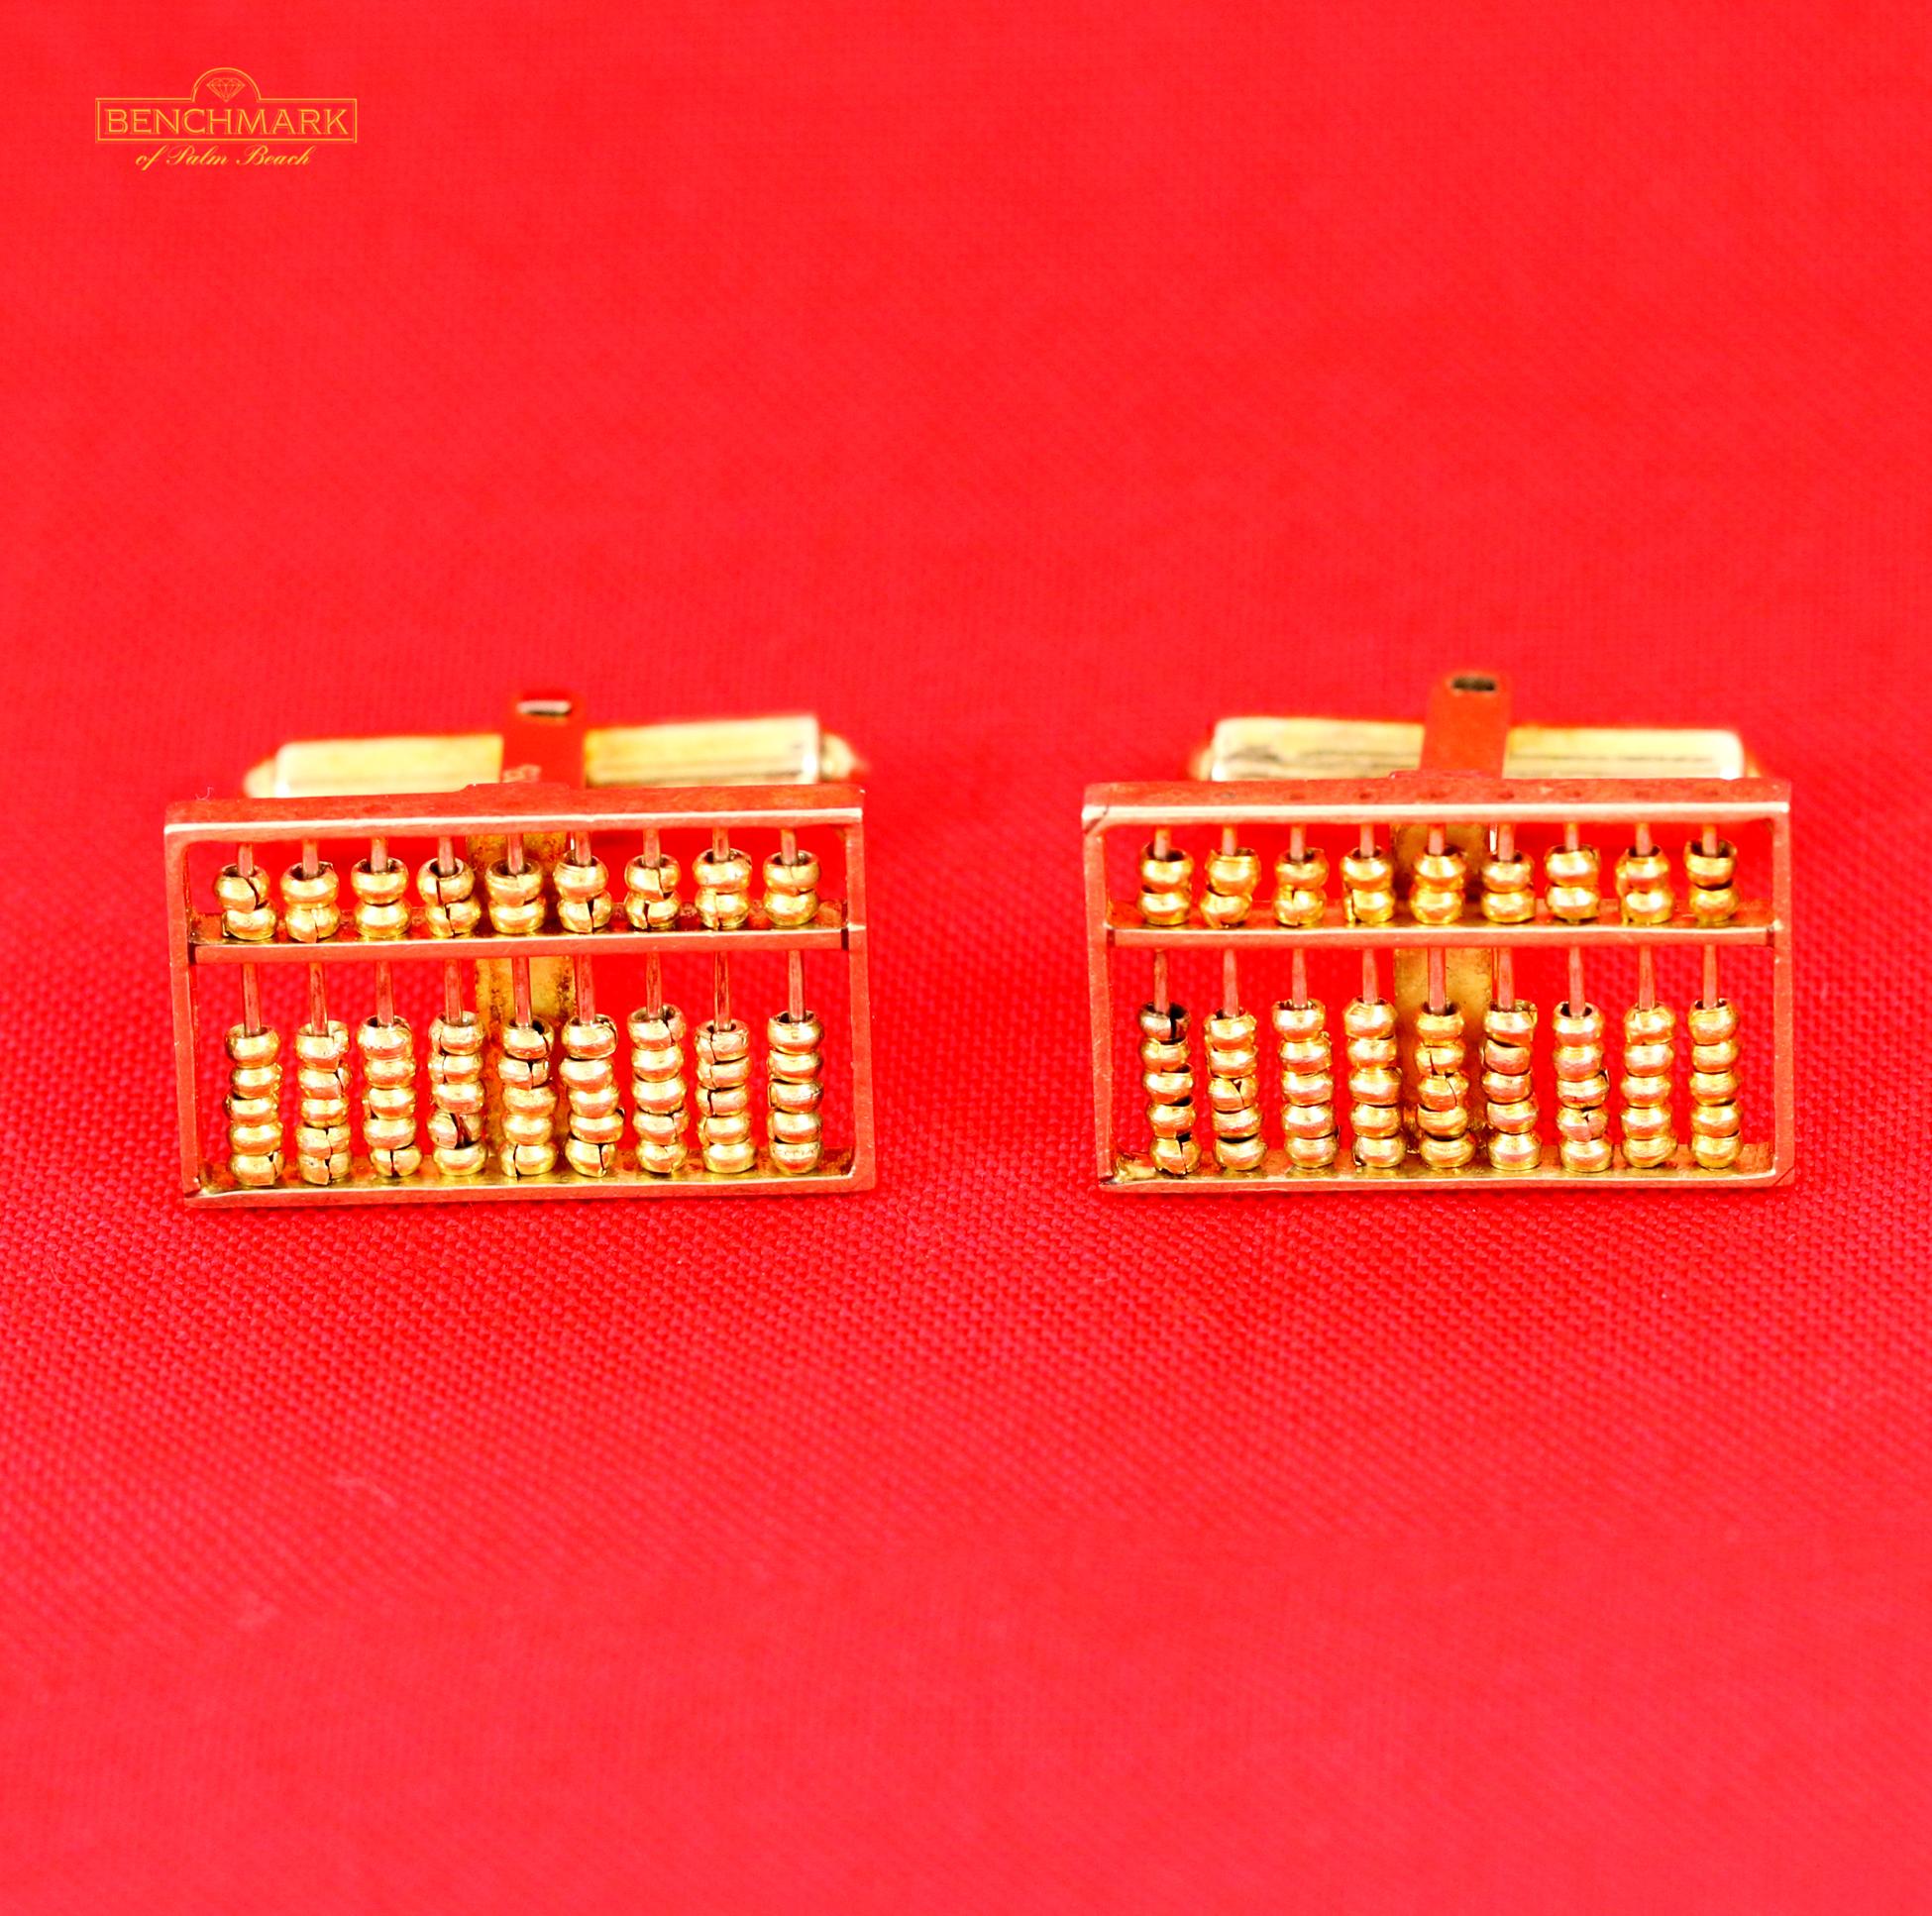 A pair of 14 Karat yellow gold cufflinks, measuring 1/2 of an inch tall, and 7/8 of an inch wide. These handsome cufflinks have a brilliant abacus design, with gold wire drawn through the frame, to facilitate the movable gold beads. Overall weight